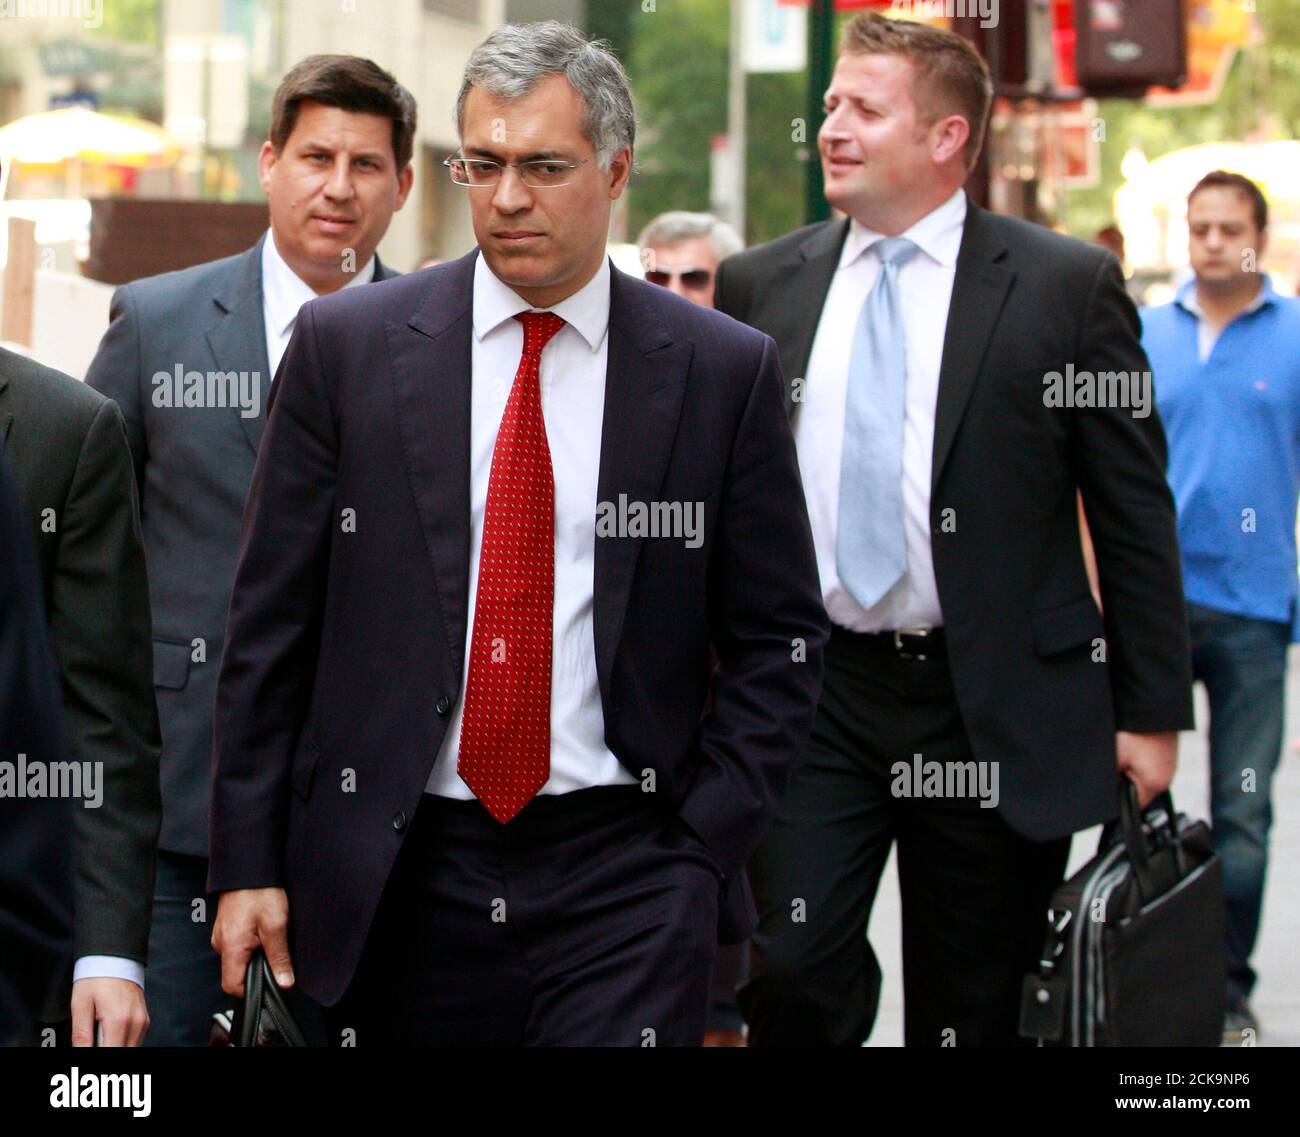 Manchester United Chief Operating Officer (COO) Michael Bolingbroke (C) walks with members of the Manchester United Ltd. IPO road show marketing team following their meetings with bankers in New York, August 6, 2012. Manchester United Ltd's owners stand to make about three times their investment in the British soccer club if it successfully goes public. REUTERS/Brendan McDermid (UNITED STATES  - Tags: BUSINESS SPORT SOCCER) Stock Photo